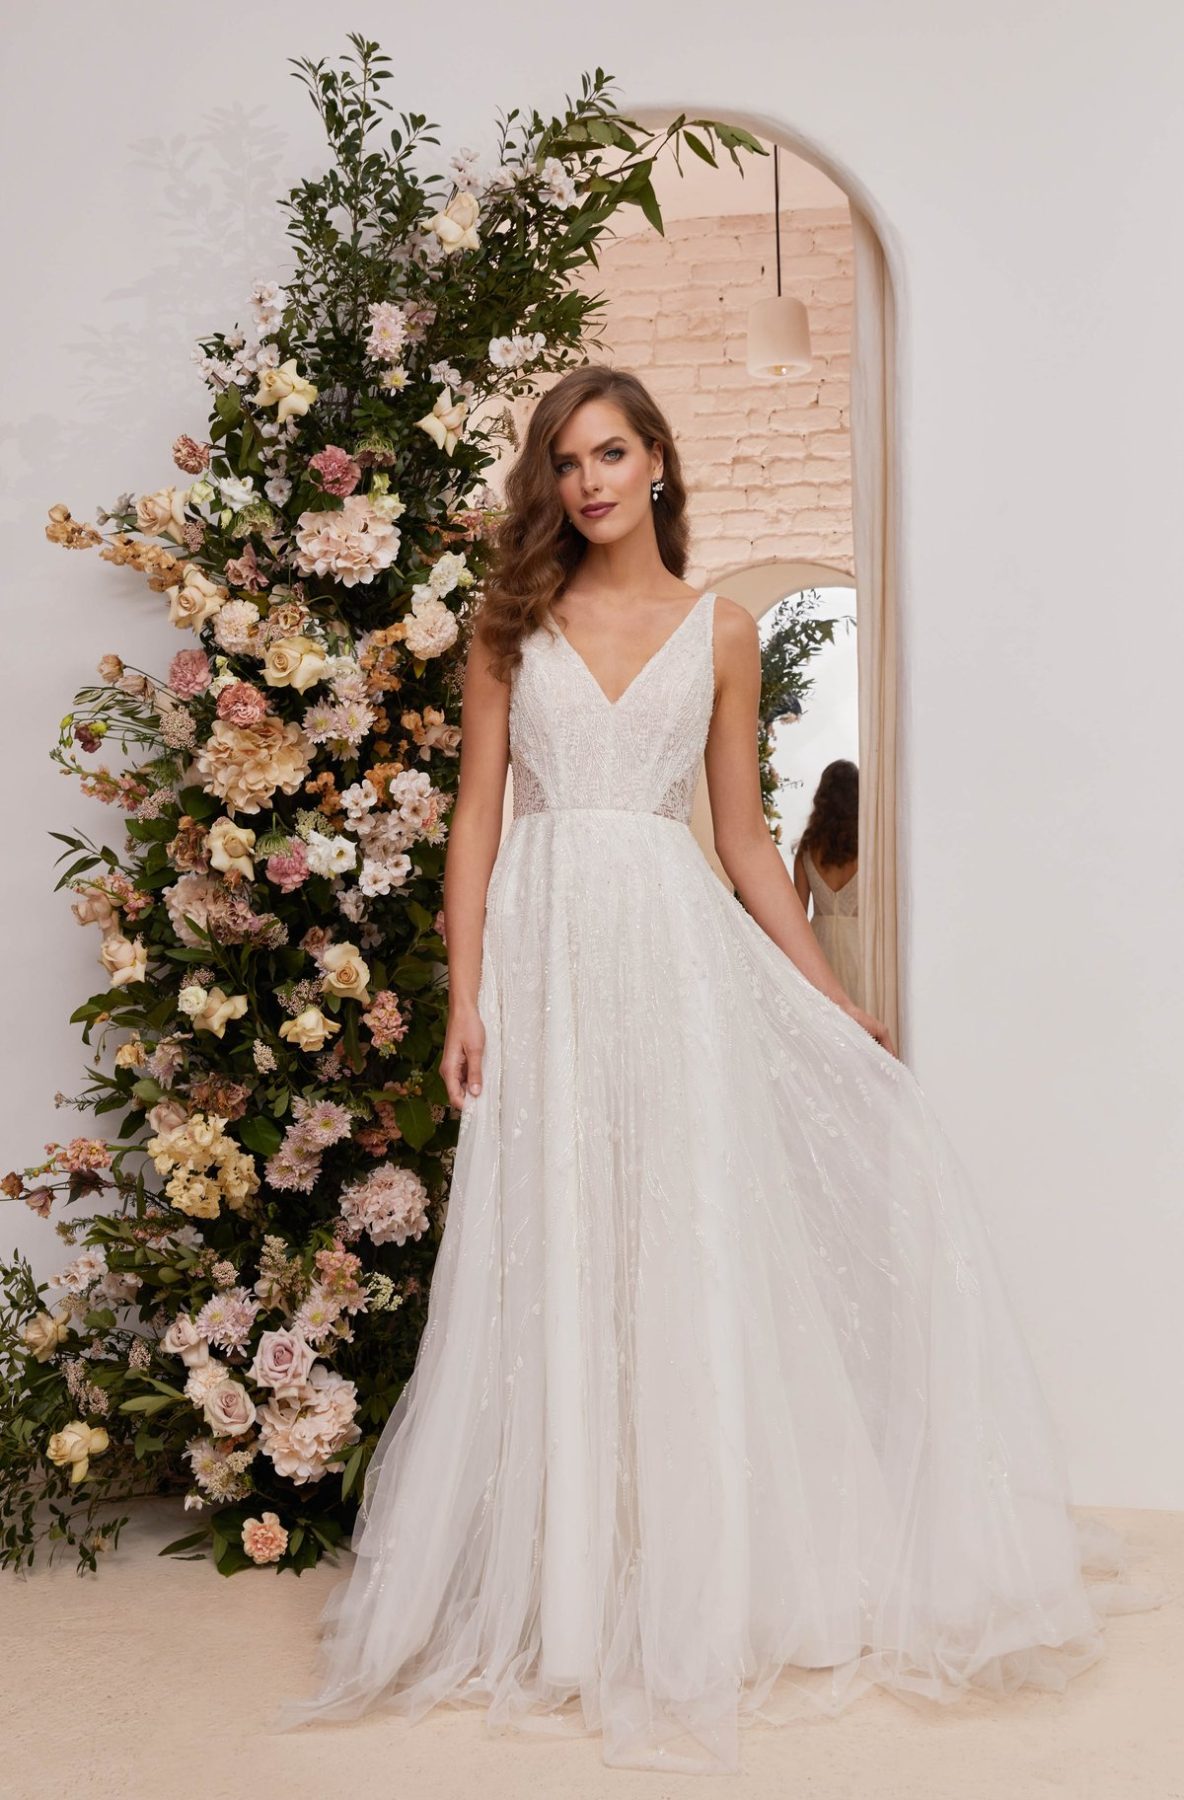 Wedding Dress Silhouettes: The Complete Style Guide - Zola Expert Wedding  Advice